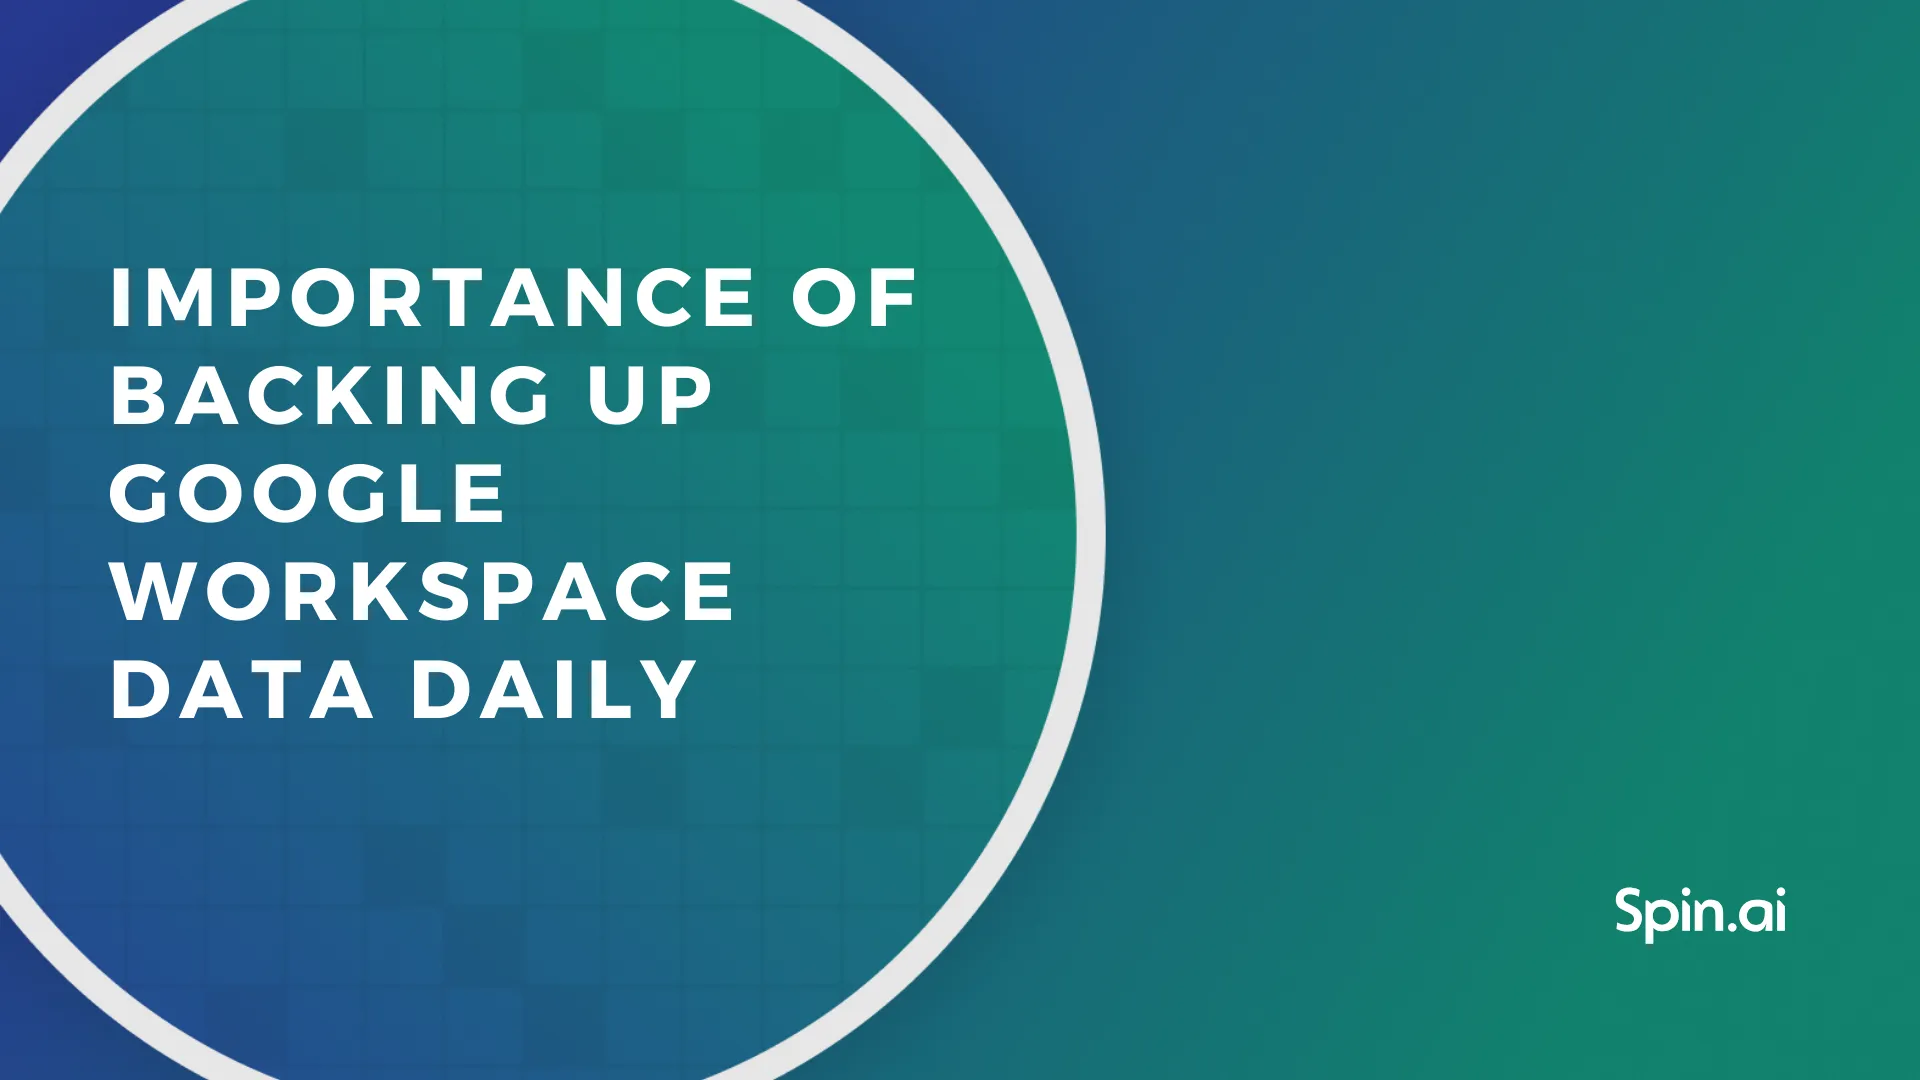 Importance of Backing Up Google Workspace Data Daily